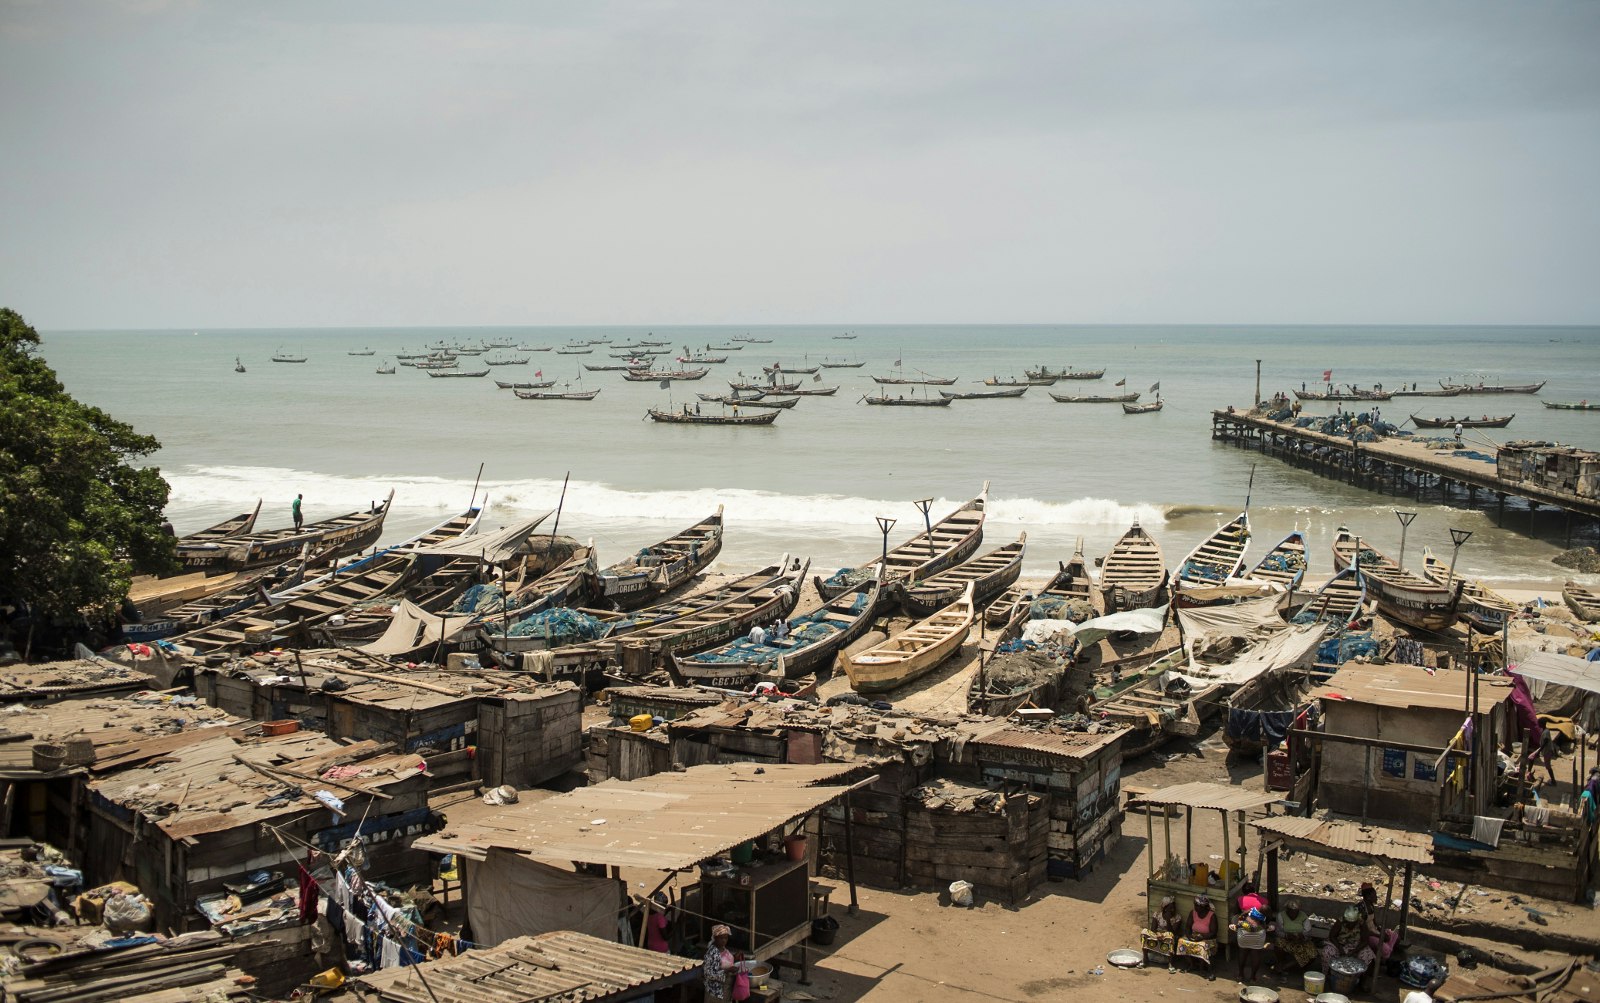 This image looks over a beach chalk full of traditional fishing boats to the sea and a distant horizon. Floating in the waer are also dozens of fishing boats © Elio Stamm / Lonely Planet